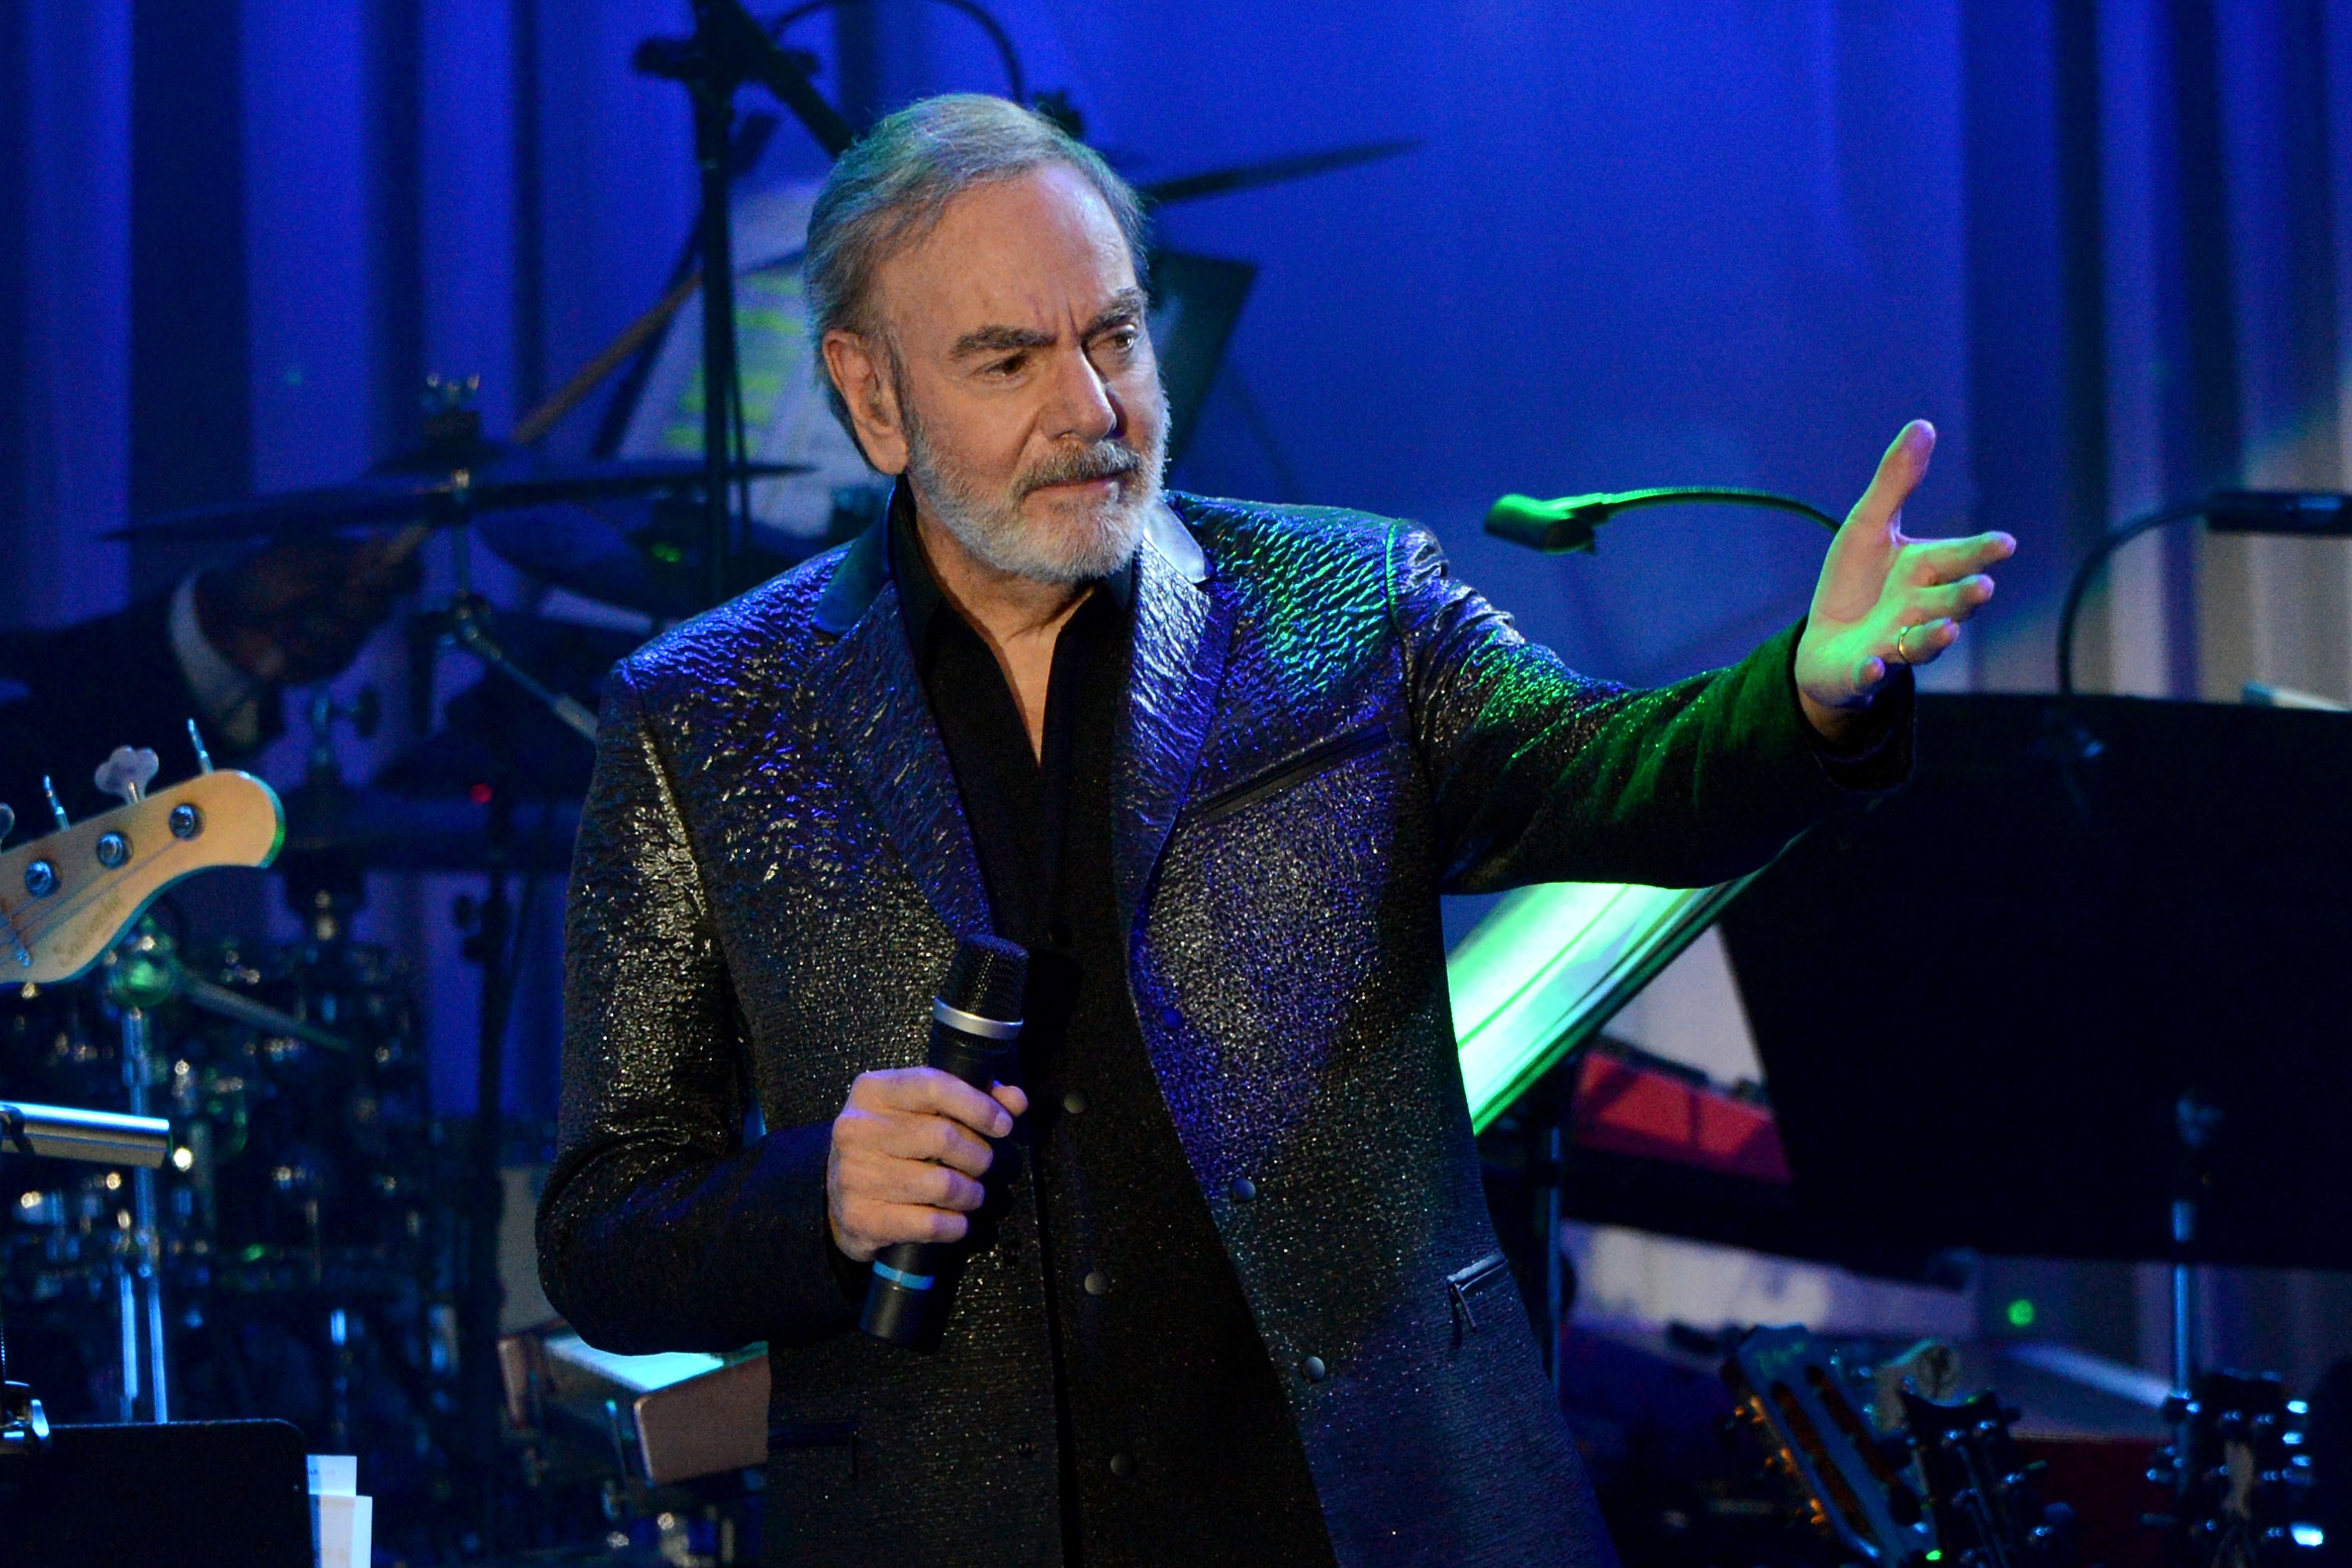 Neil Diamond performs onstage during the 2017 Pre-Grammy Gala and Salute to Industry Icons. (Scott Dudelson—Getty Images)